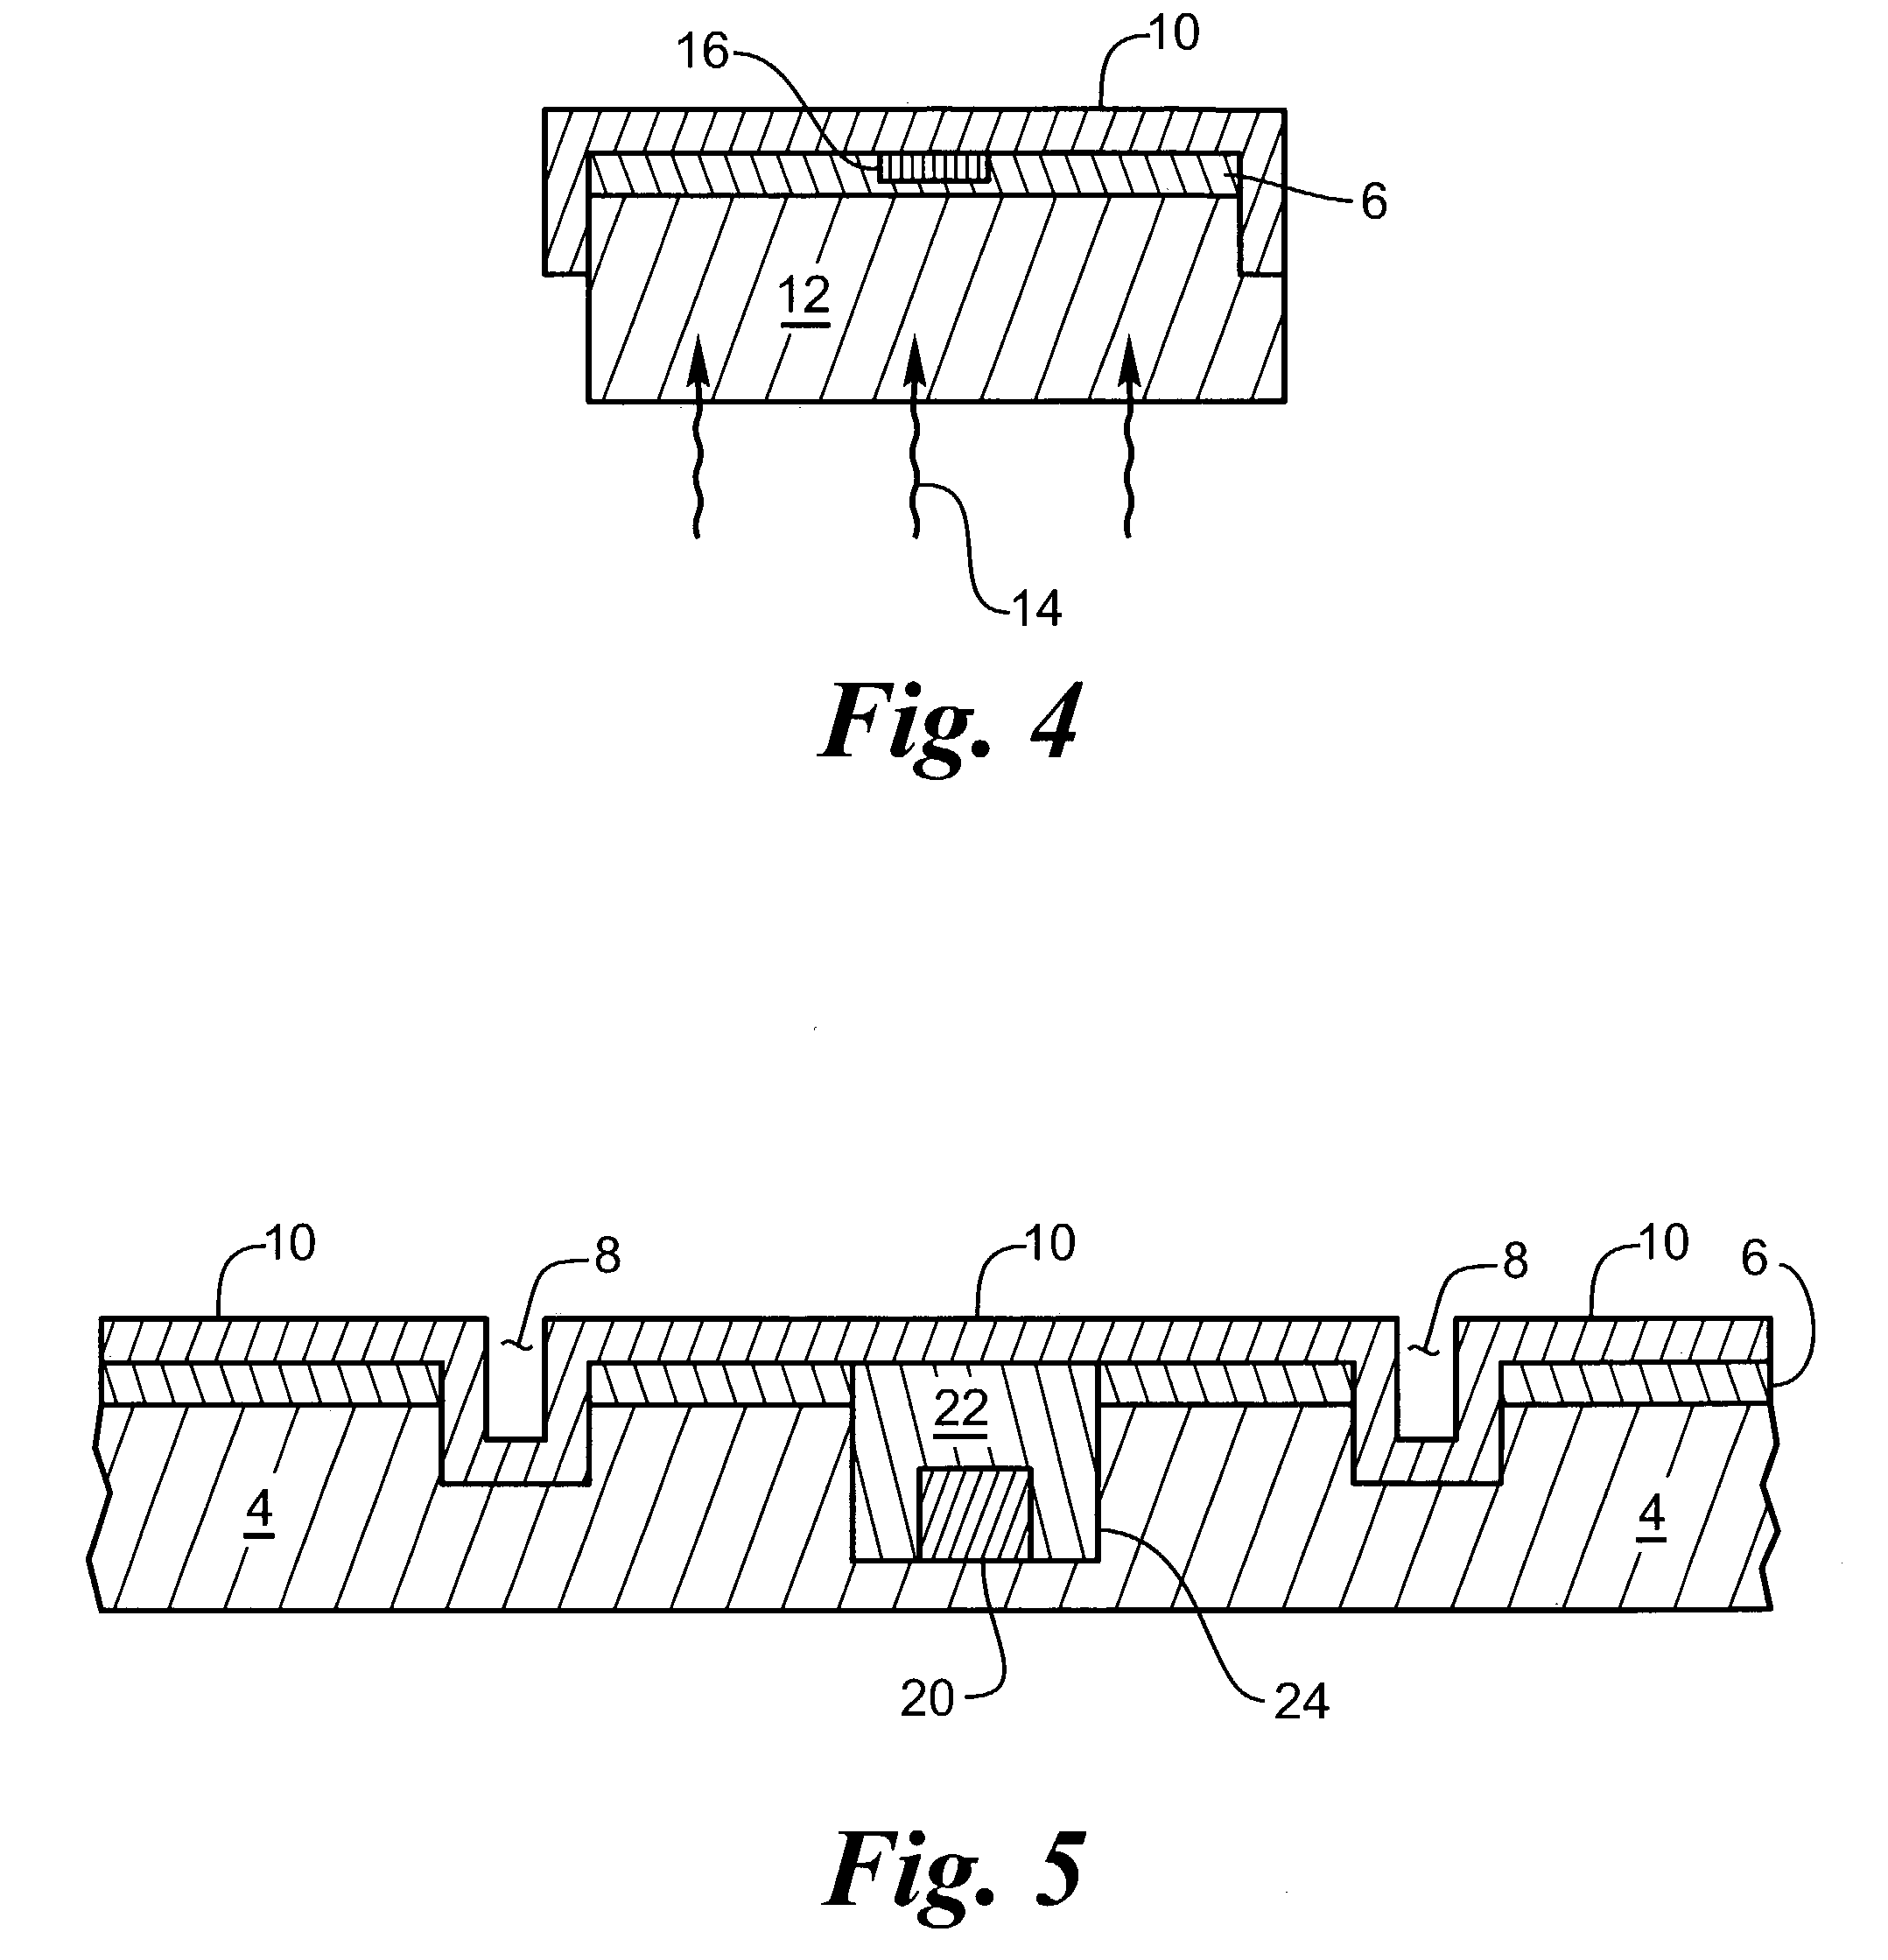 Chip level hermetic and biocompatible electronics package using SOI wafers